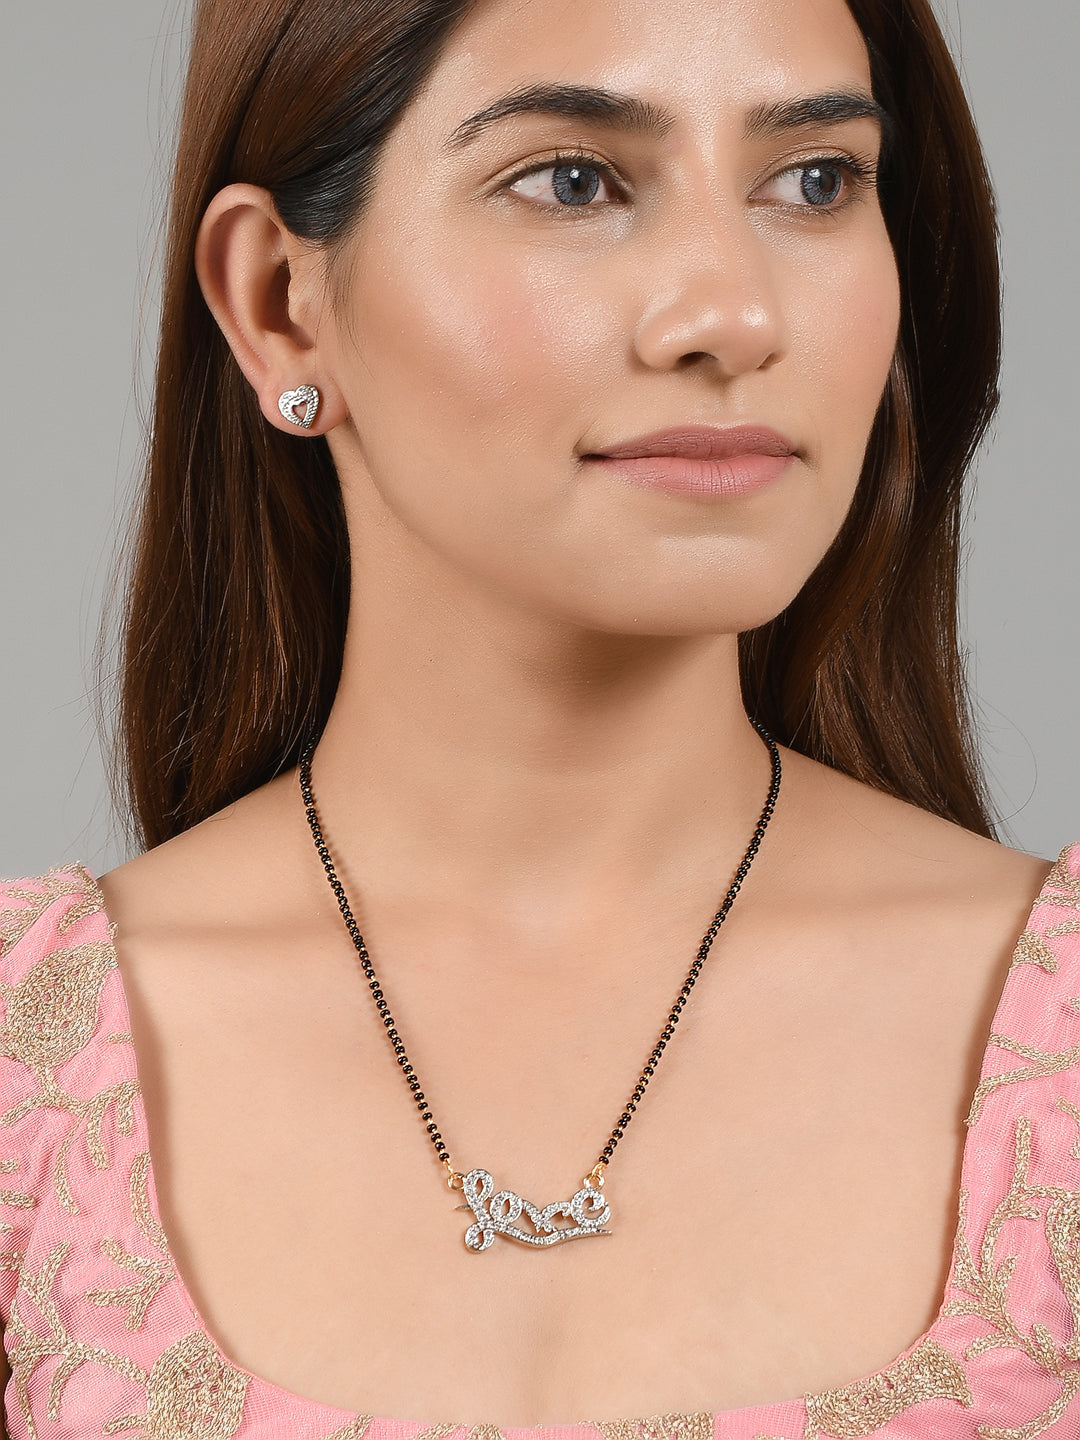 American Daimond Love Mangalsutra With Heart Earrings